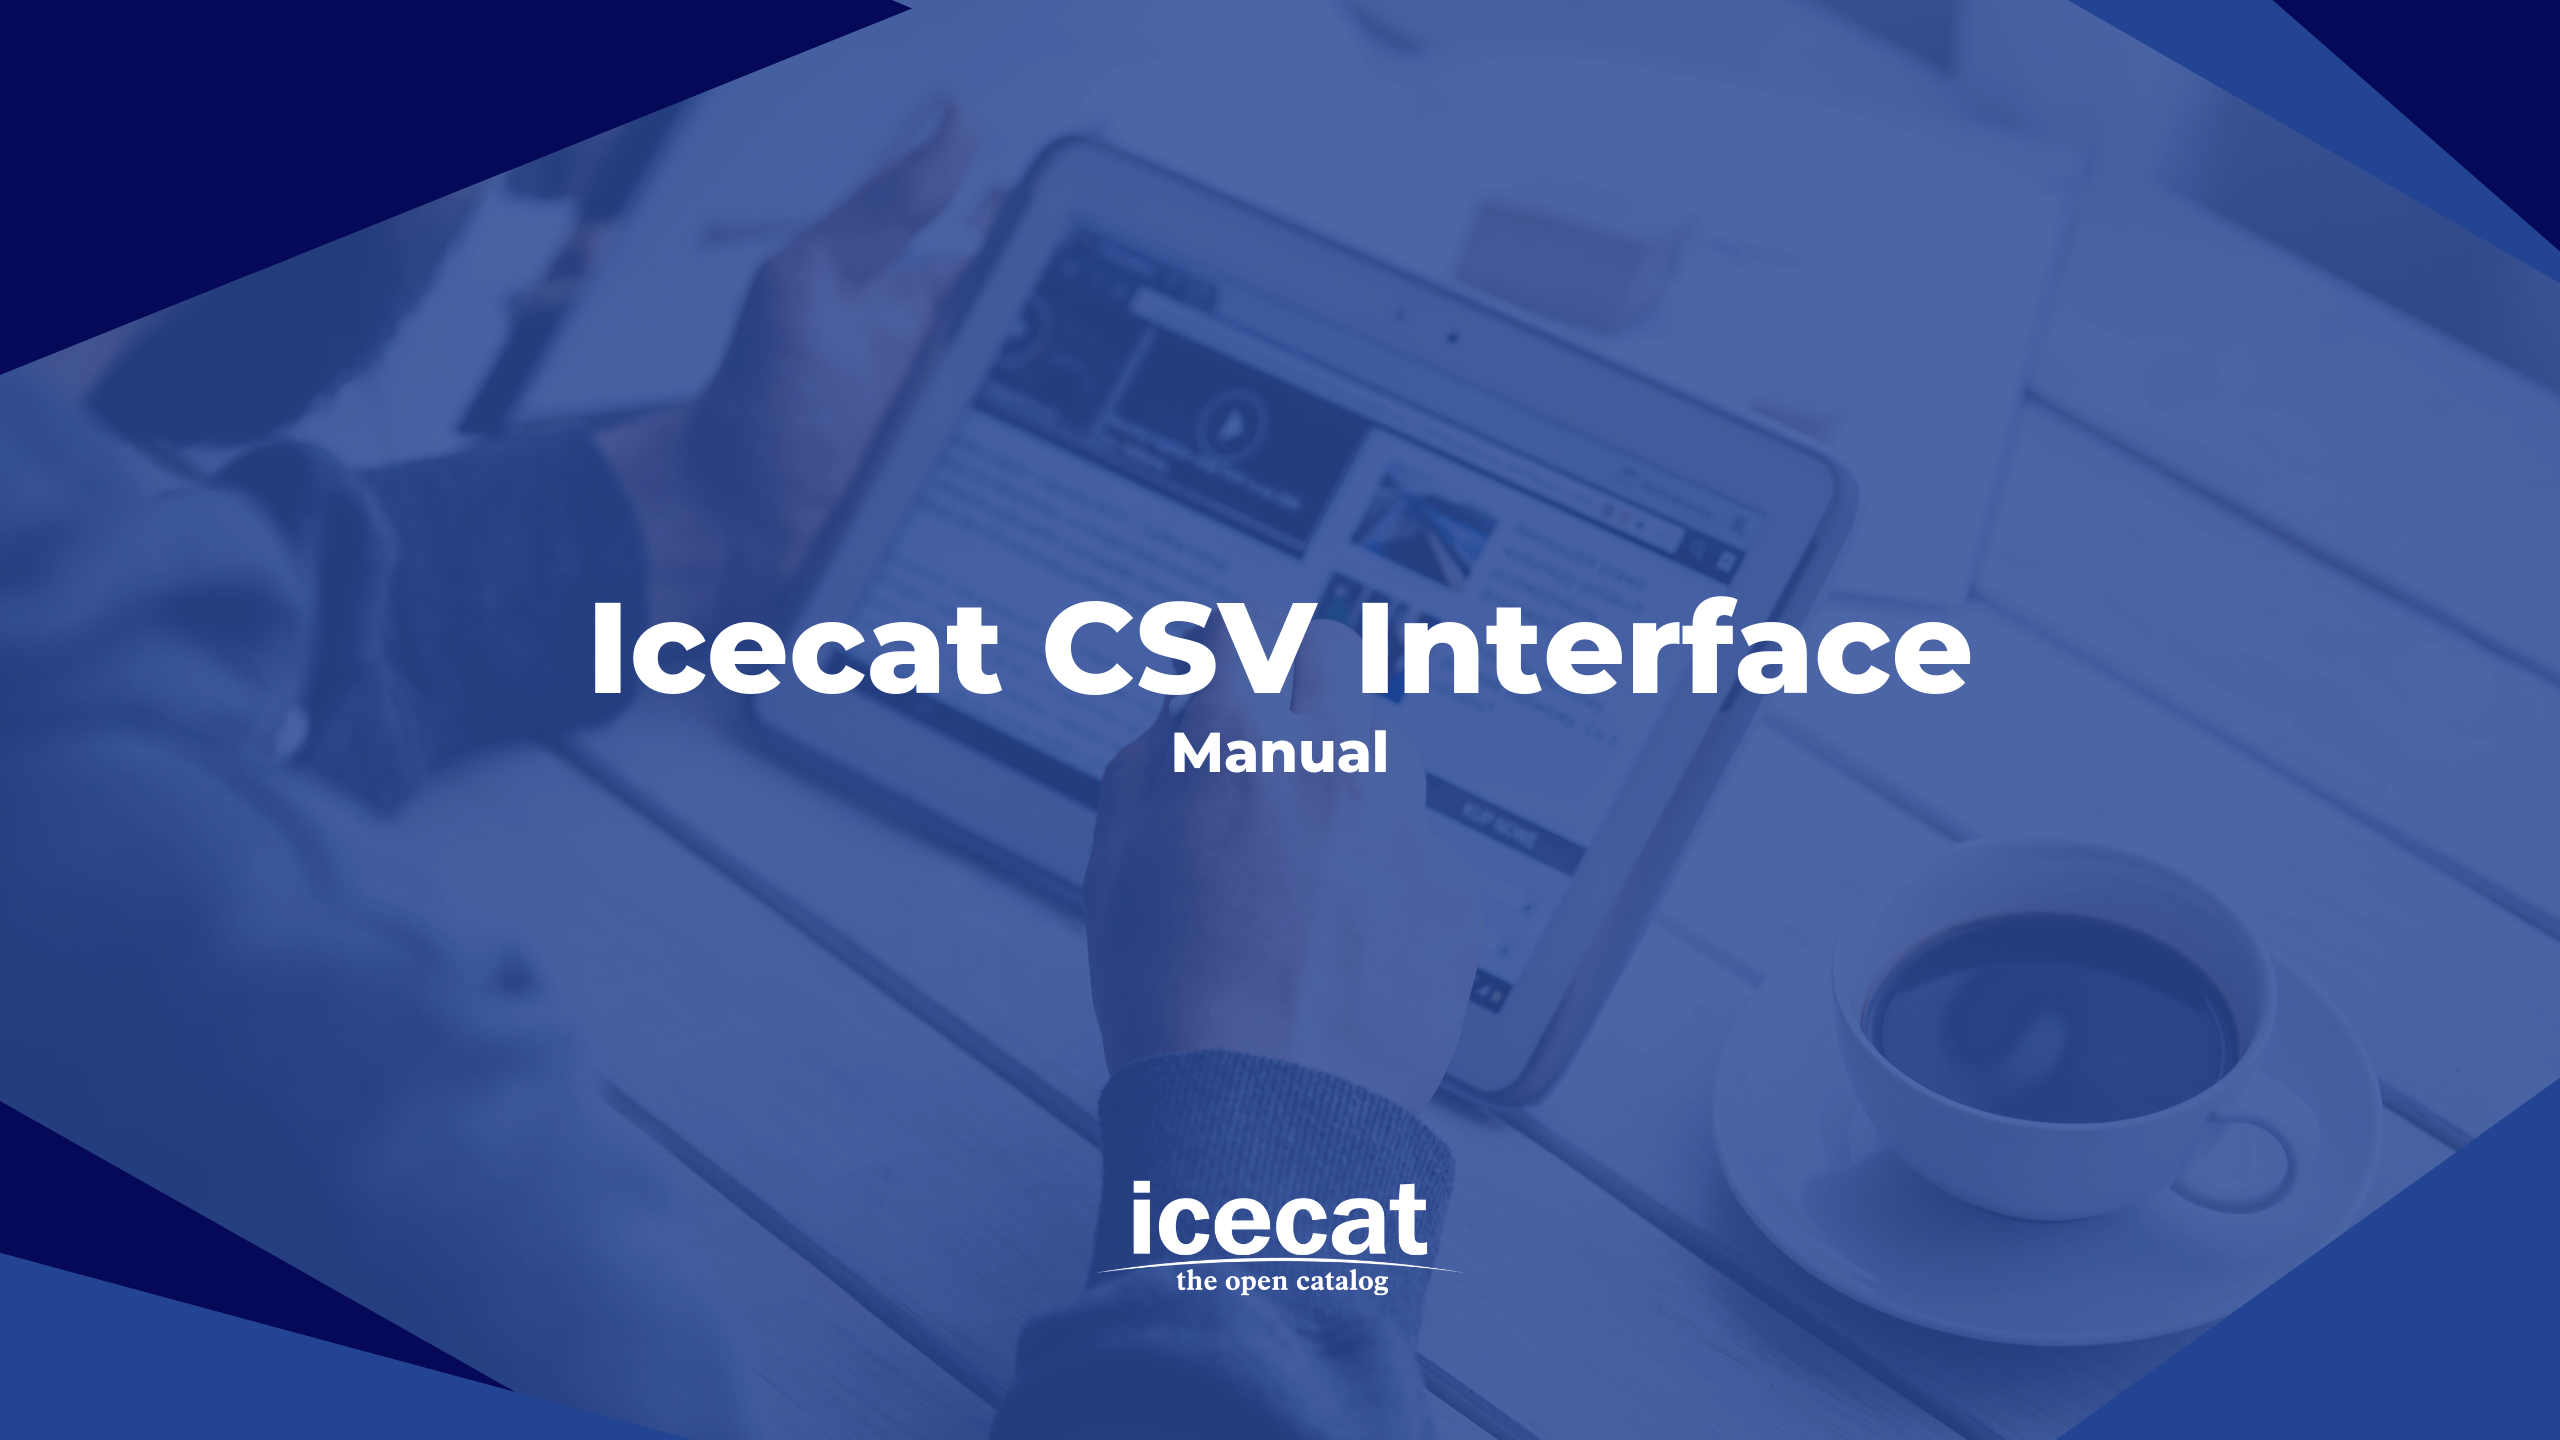 Manual for Icecat CSV Interface